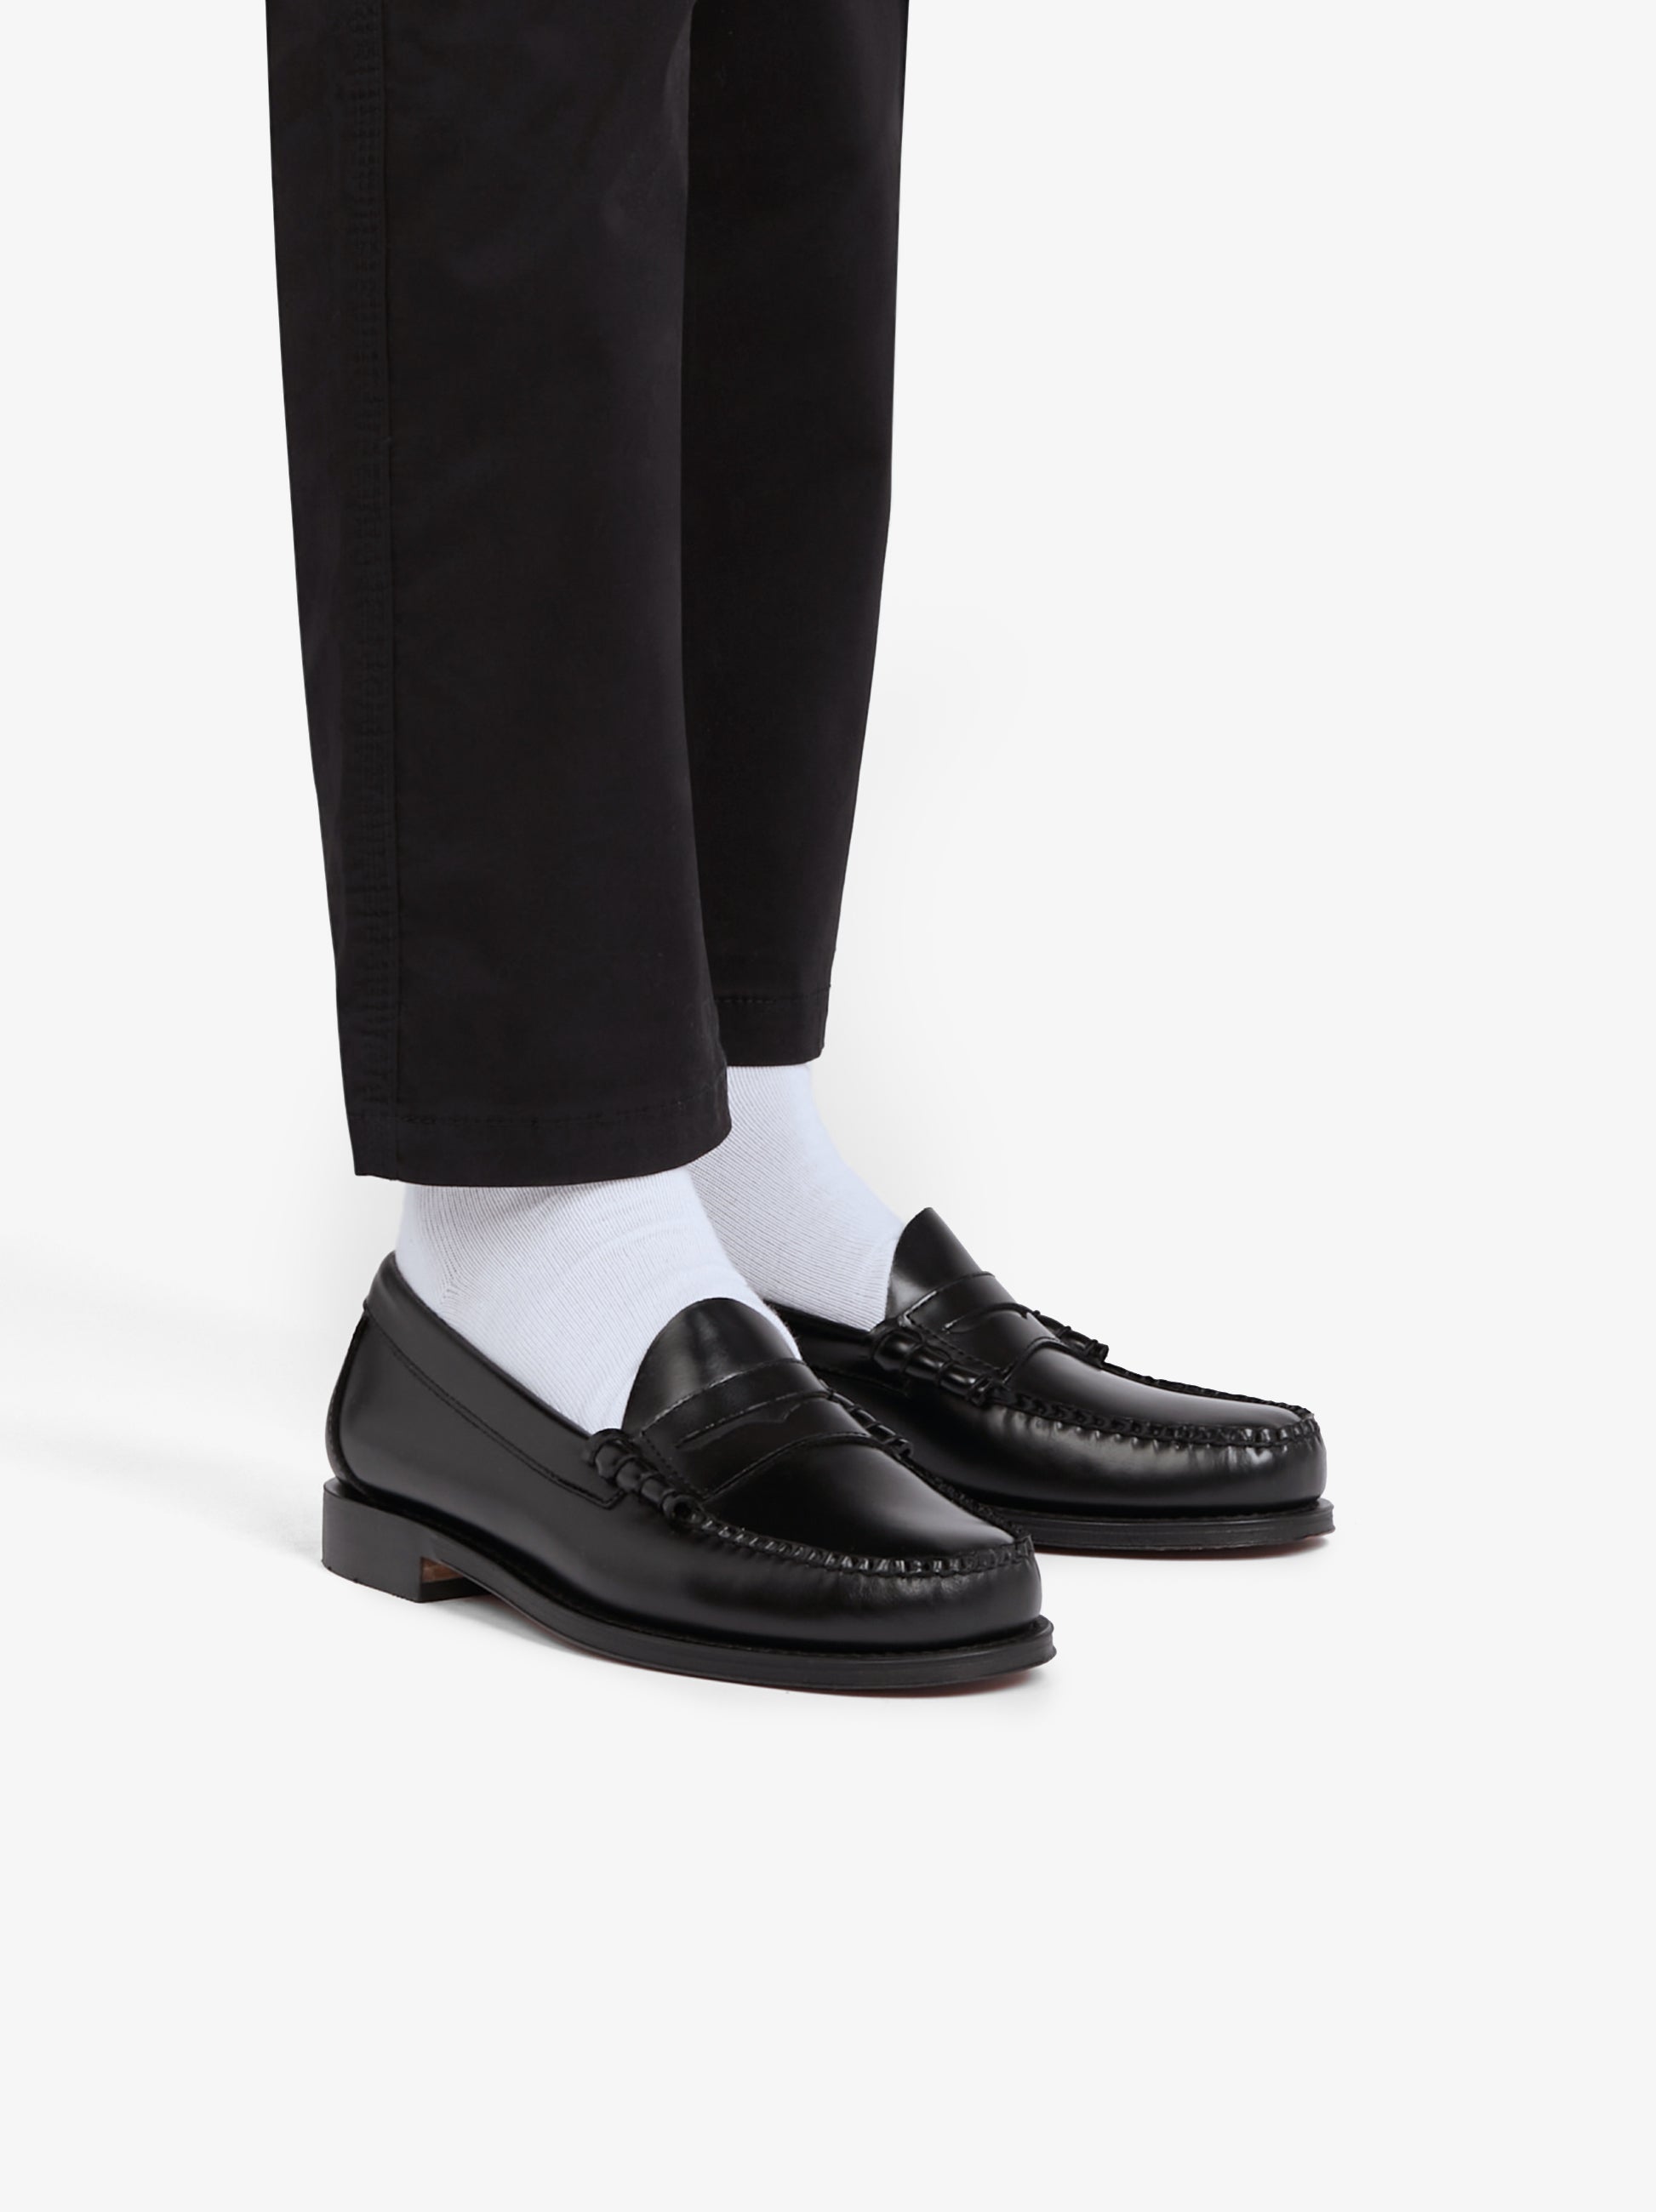 Black Leather Loafer Shoes Mens | Bass Weejuns Larson – G.H.BASS 1876